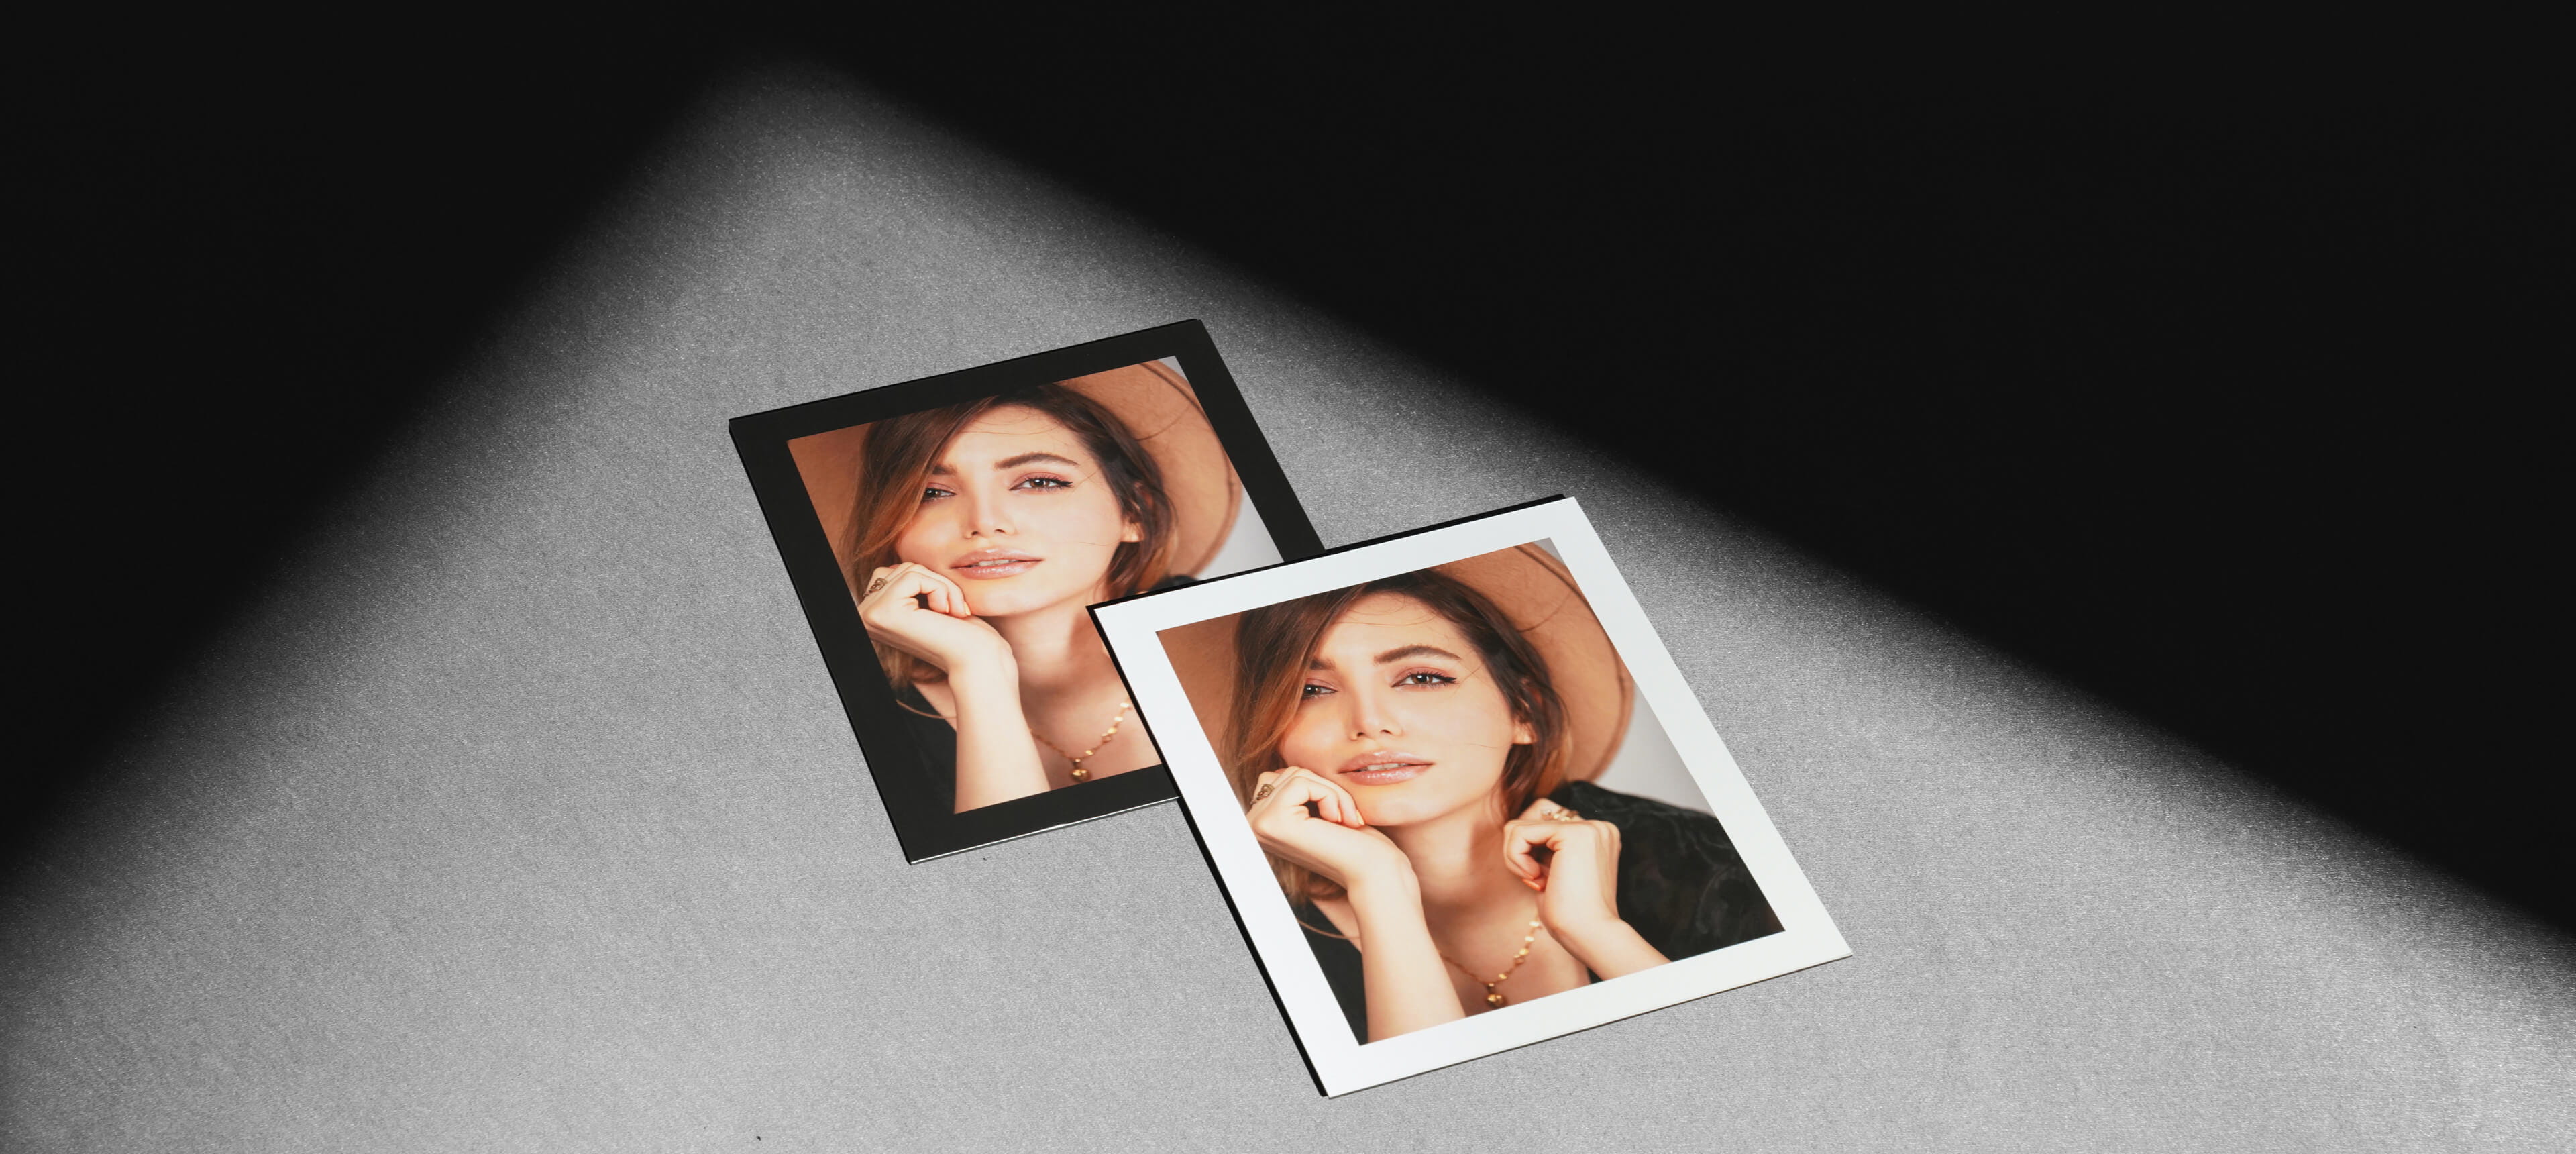 fine art prints showing two photos of the same woman with different border colors